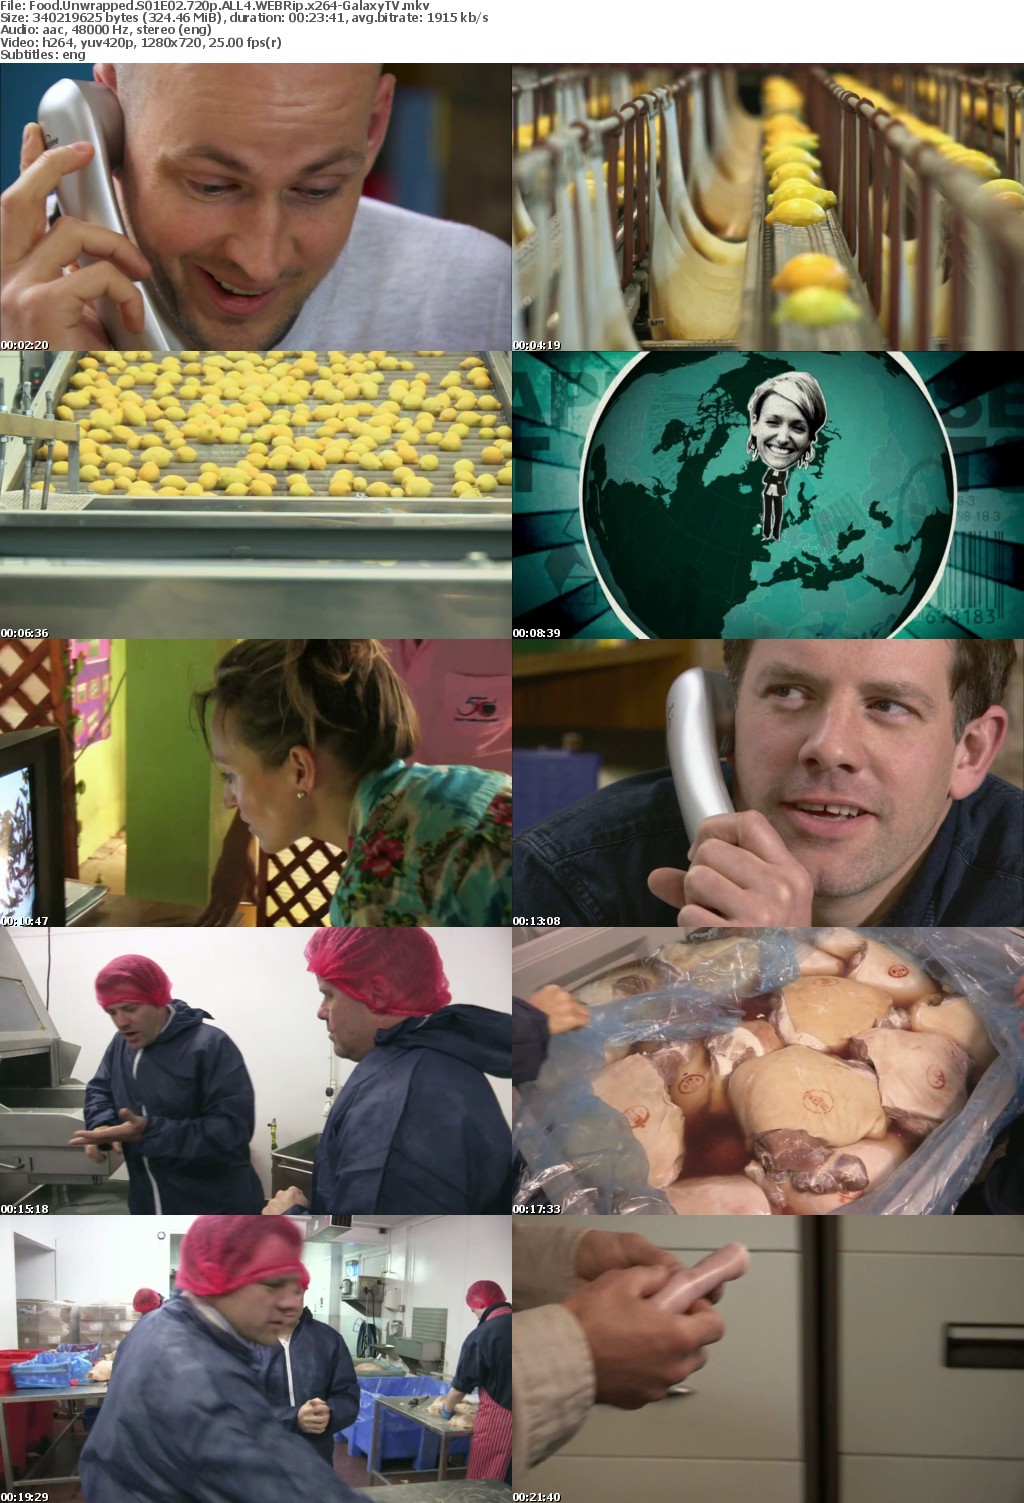 Food Unwrapped S01 COMPLETE 720p ALL4 WEBRip x264-GalaxyTV